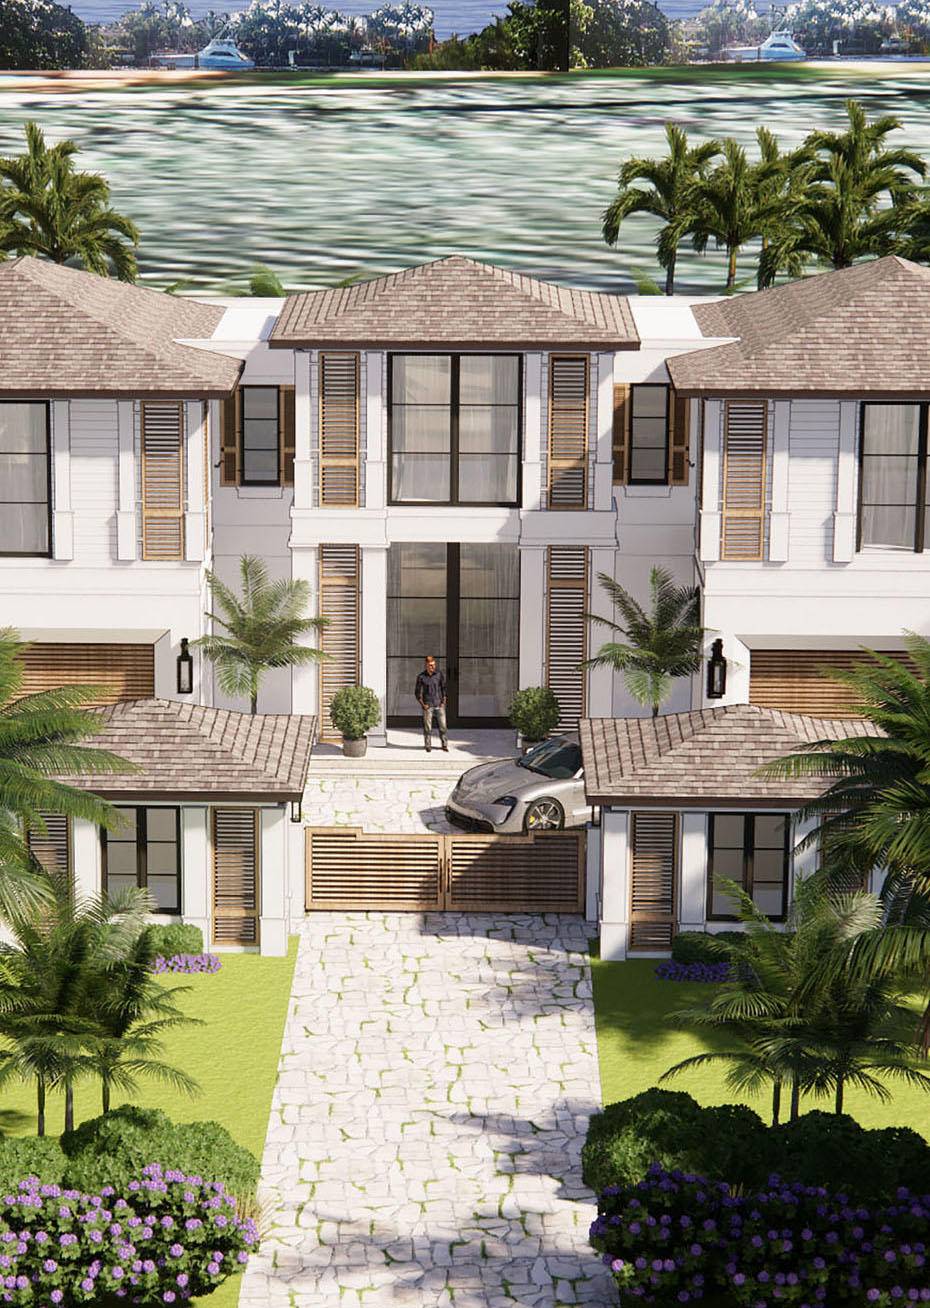 New Tropical Island inspired Intracoastal estate sited on 50 ft of waterfrontage on prestigious Fifth Avenue Estates ''Mansion Row'' by award winning Affinity Architects and master builder National Custom Homes.